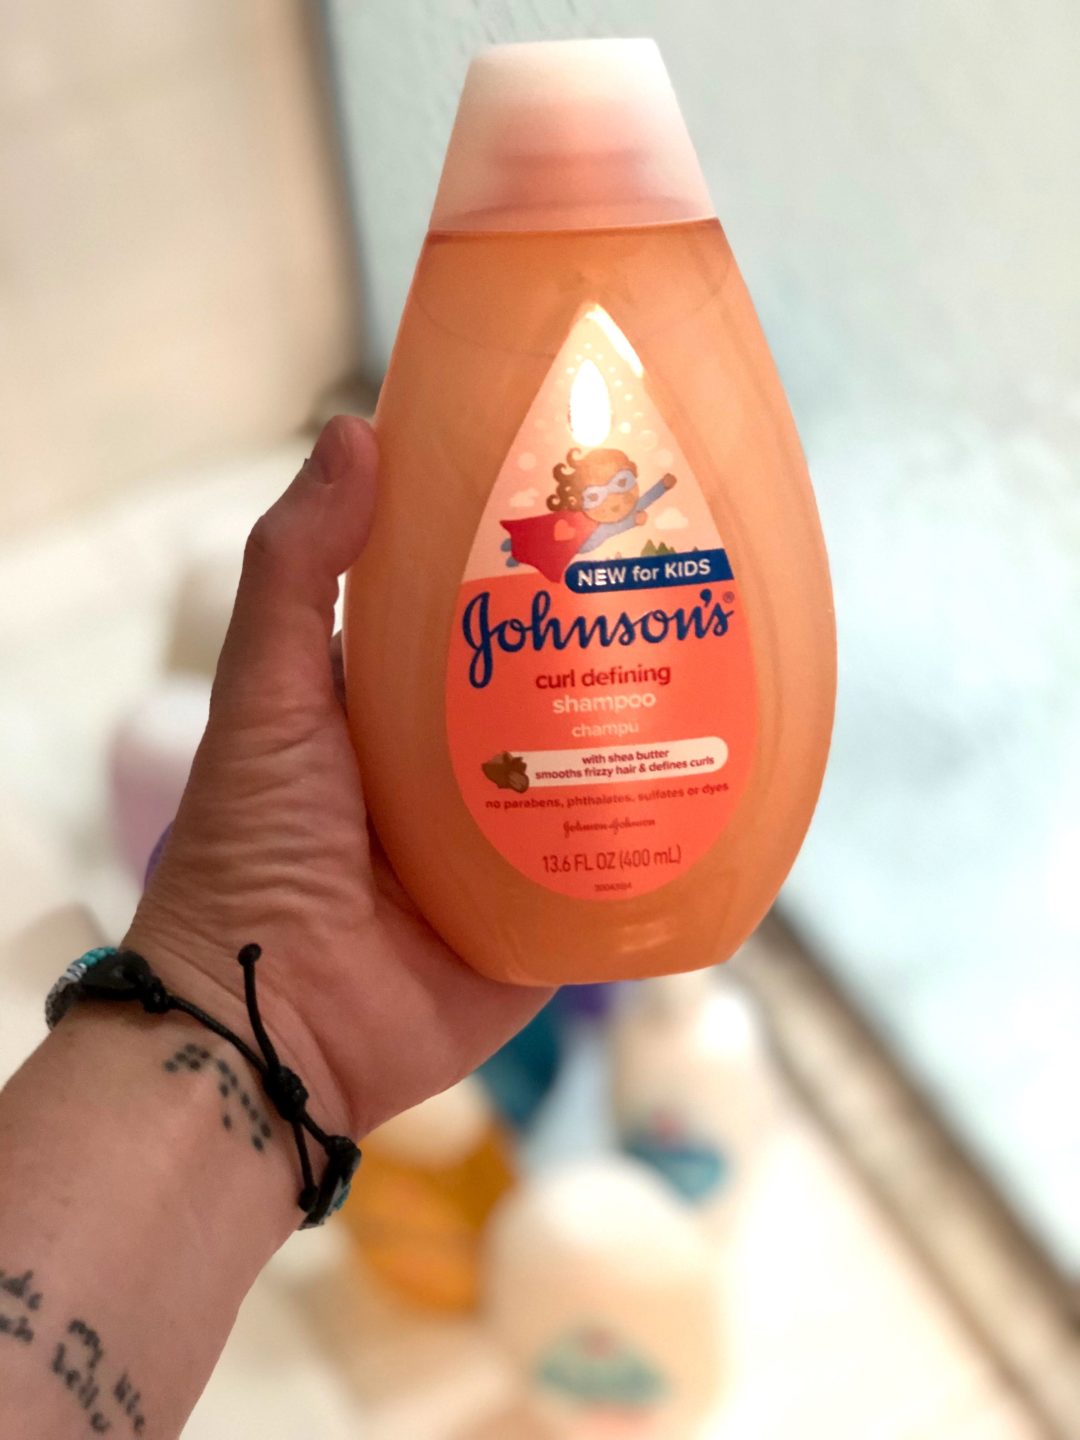 New Johnson's for Kids Hair Care: How to pick the one right for your child